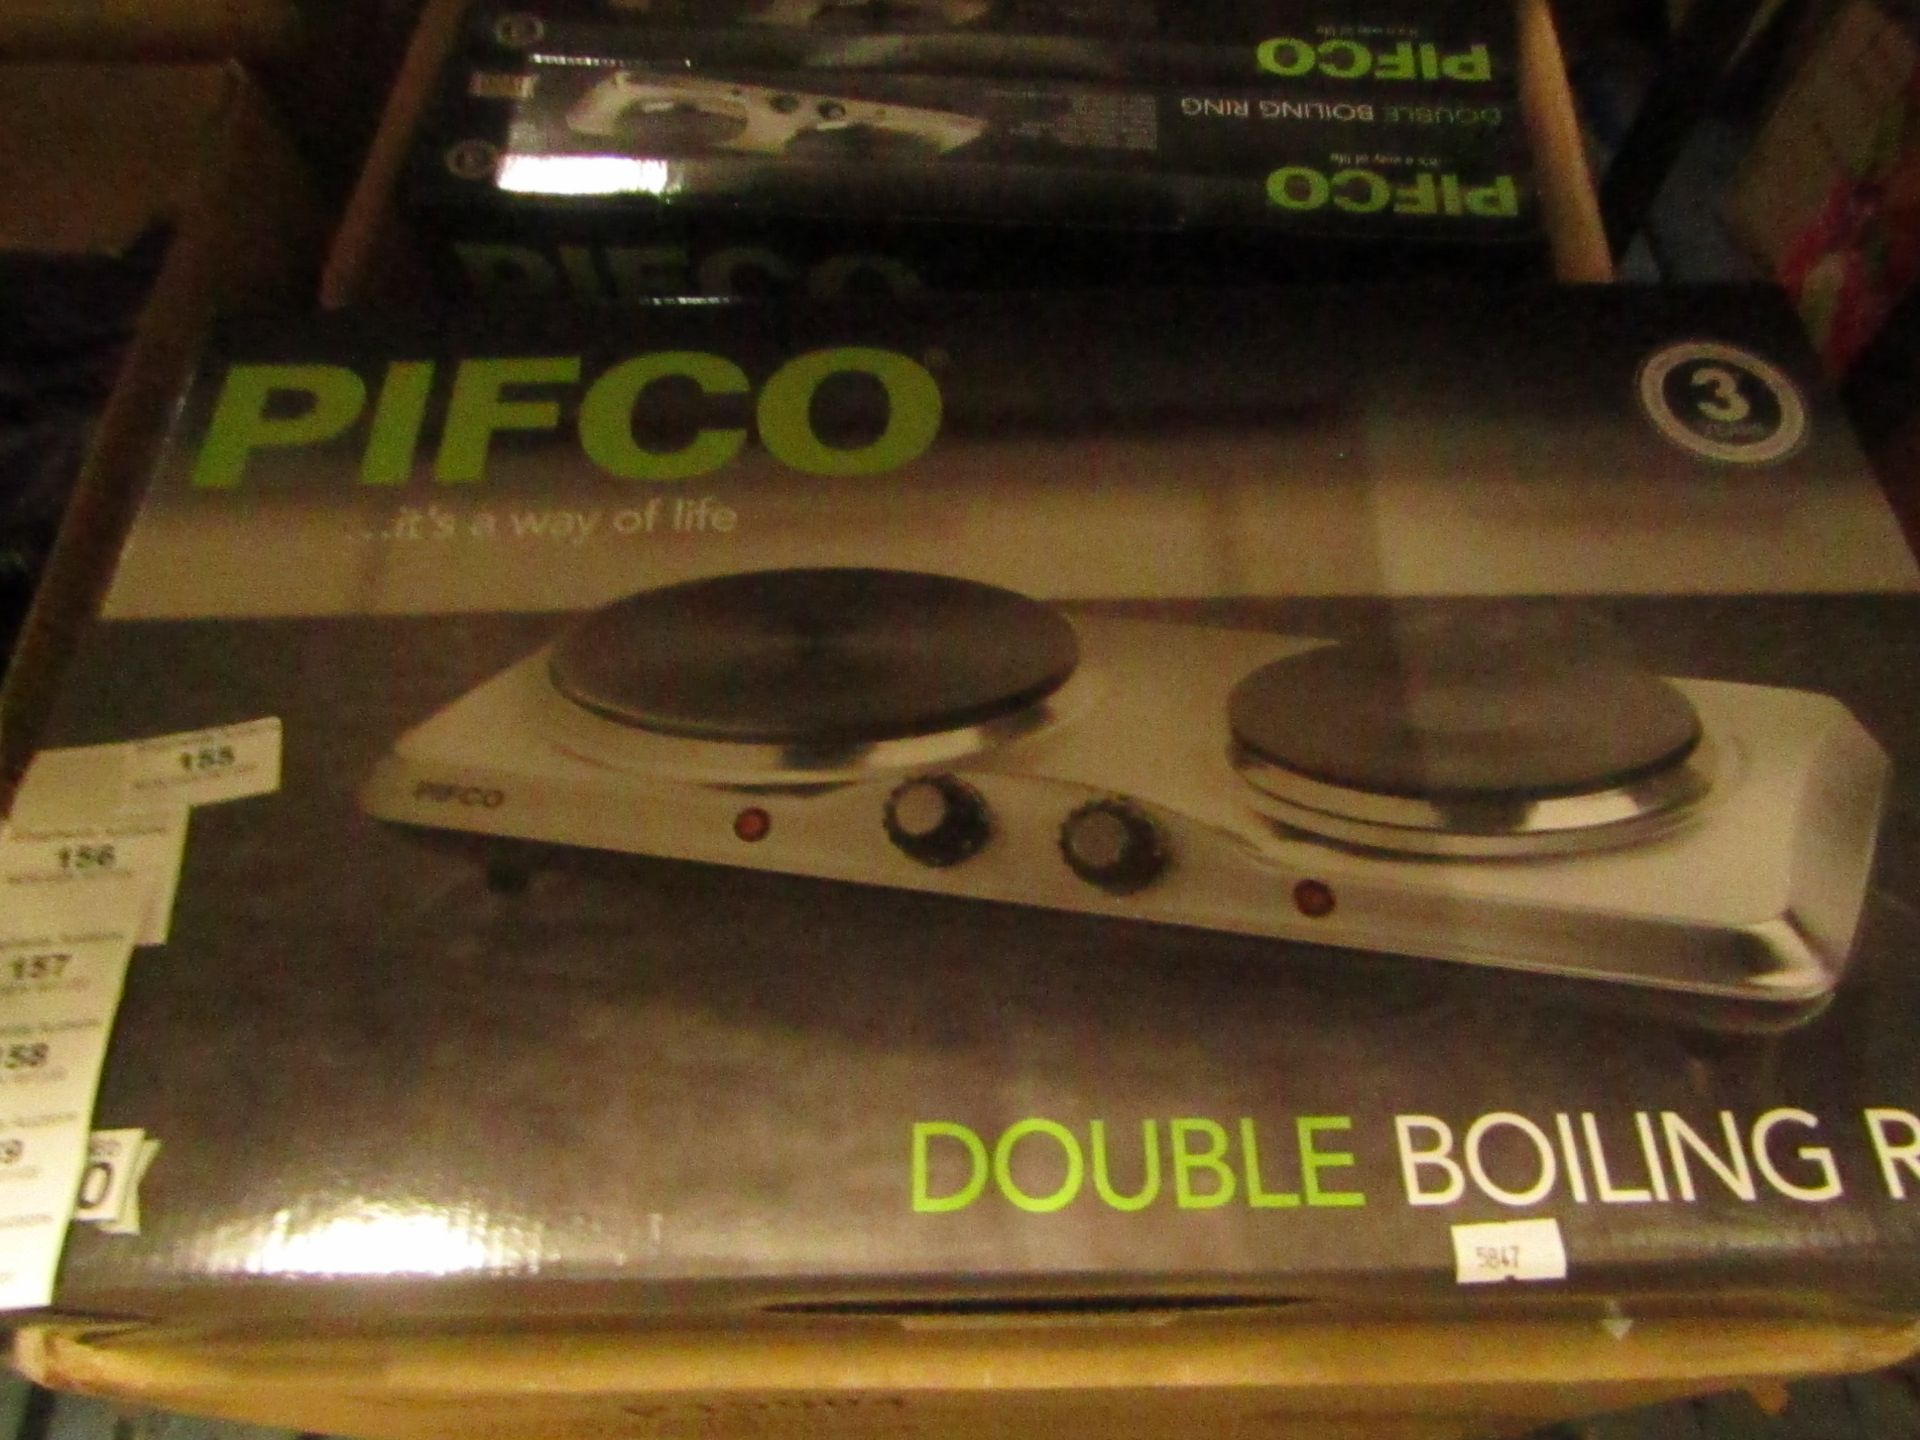 Pifco double boiling ring, unchecked and boxed.